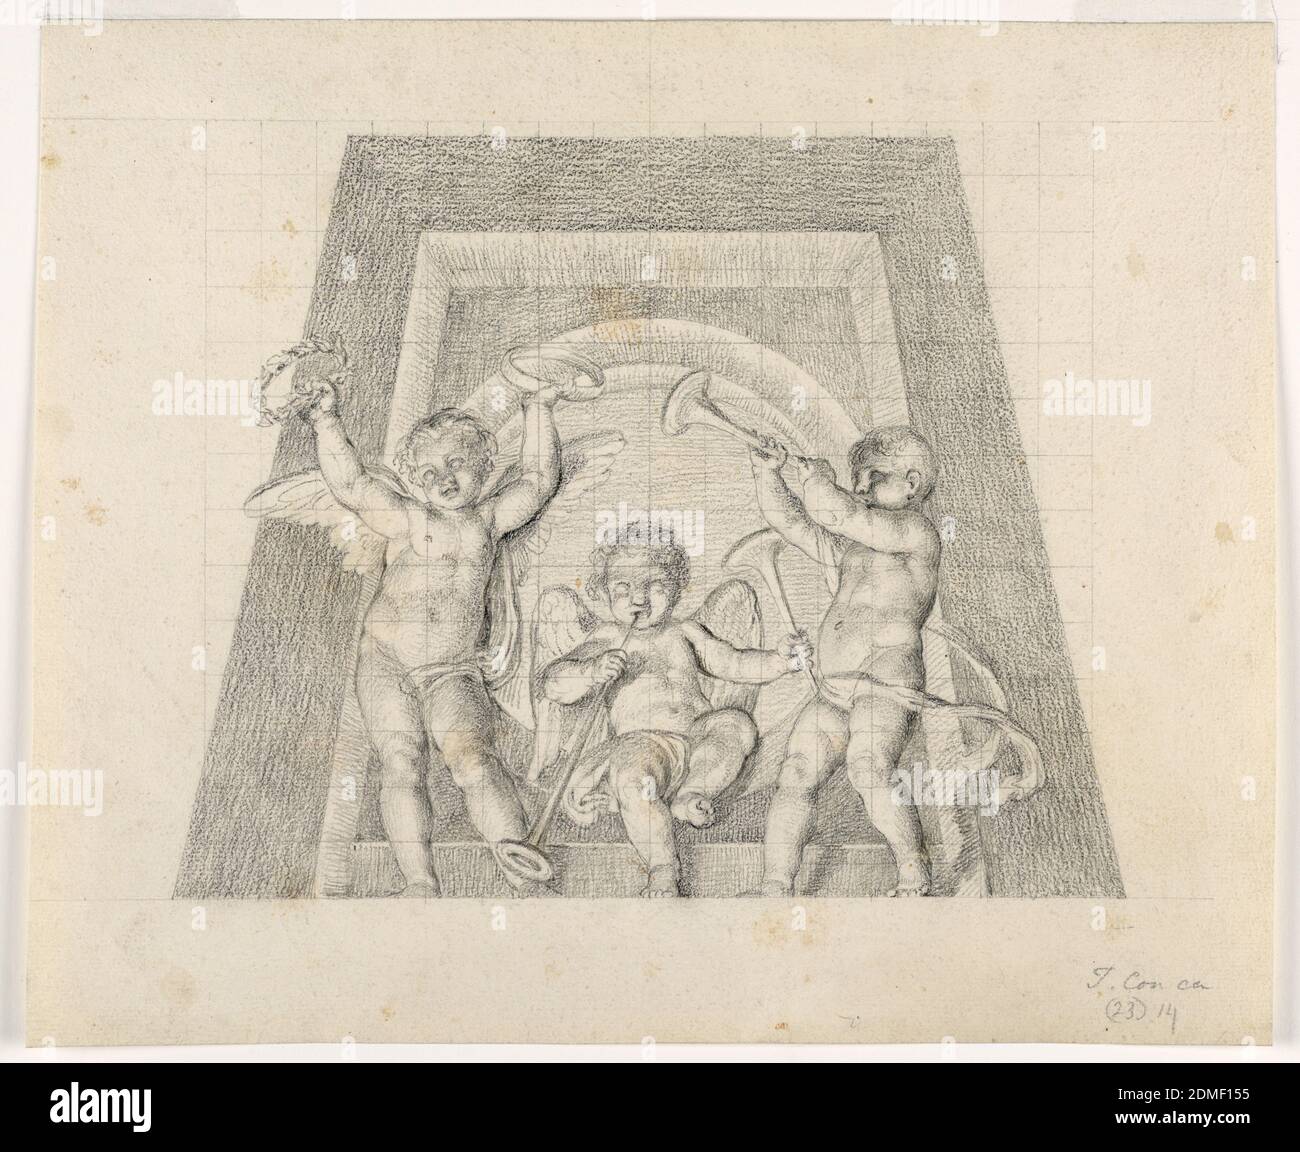 Three Putti with Trumpets, Design for Lunette of the Sala delle Muse, Museo Pio-Clementino, Vatican, Tommaso Maria Conca, Italian, 1734 – 1822, Black chalk and black crayon on heavy cream paper, squared for enlargement, Design for a lunette. Two standing and one seated putti (in the middle) with musical instruments (trumpets and tambourines), shown against the trapezoidal frame of an oculus., Italy, 1775–1800, interiors, Drawing Stock Photo